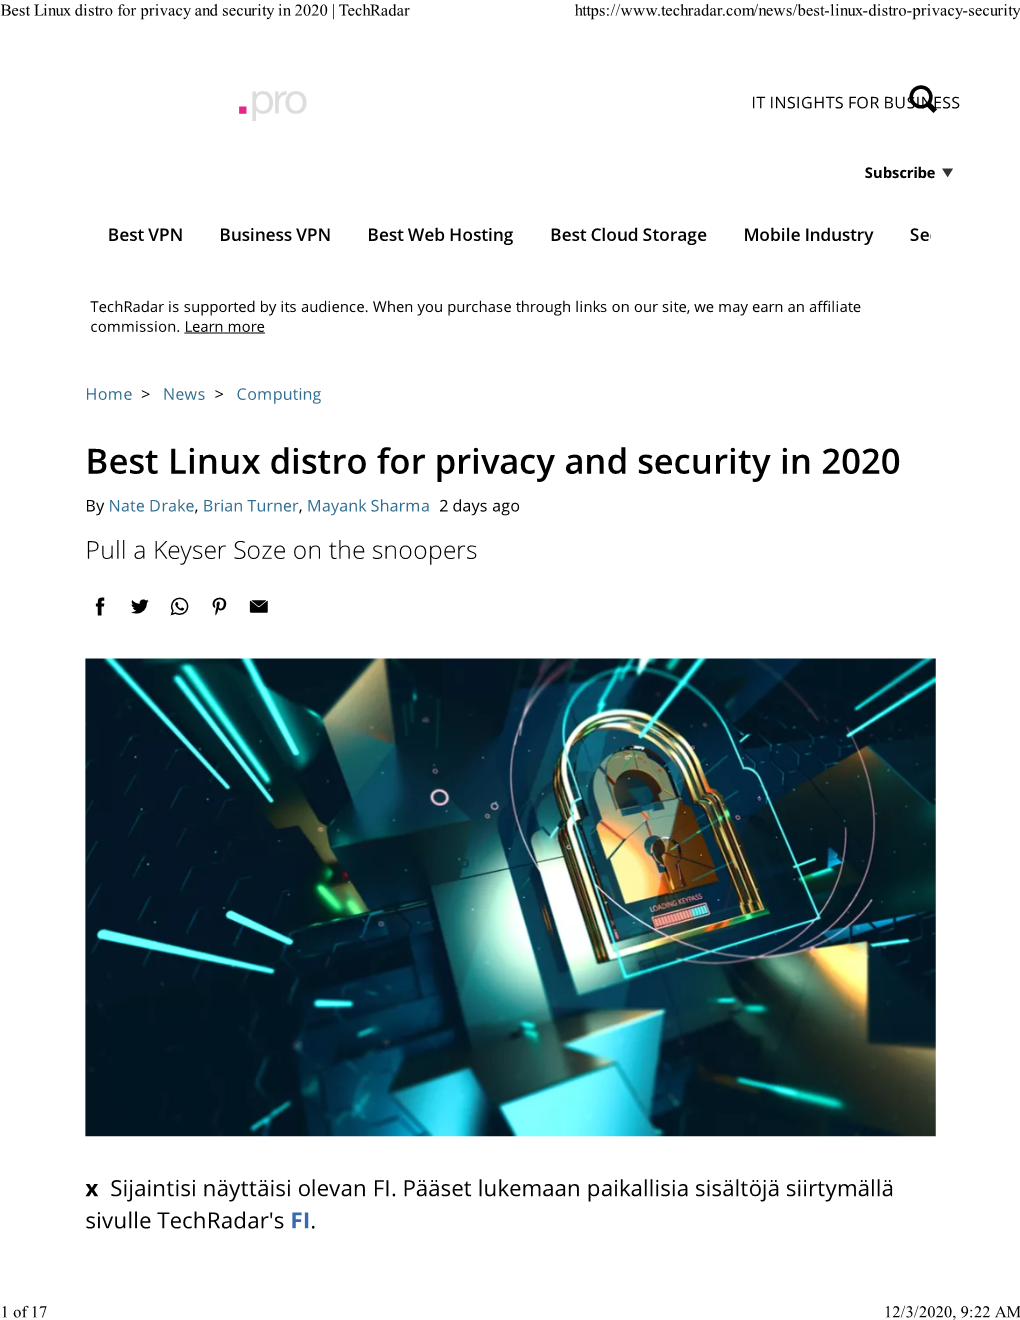 Best Linux Distro for Privacy and Security in 2020 | Techradar